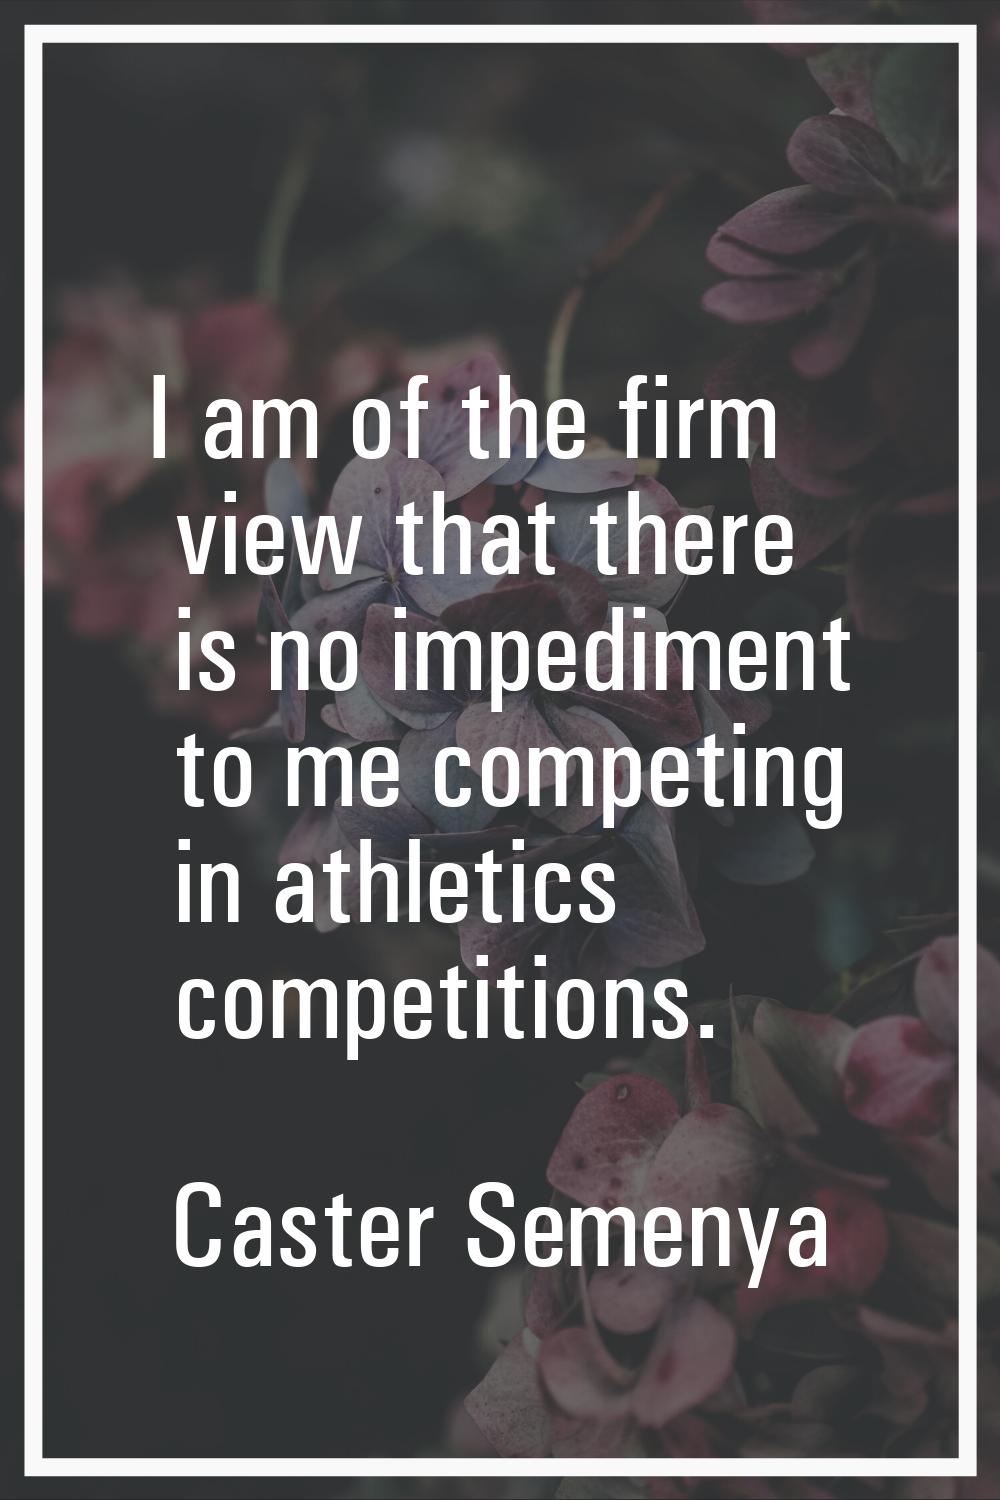 I am of the firm view that there is no impediment to me competing in athletics competitions.